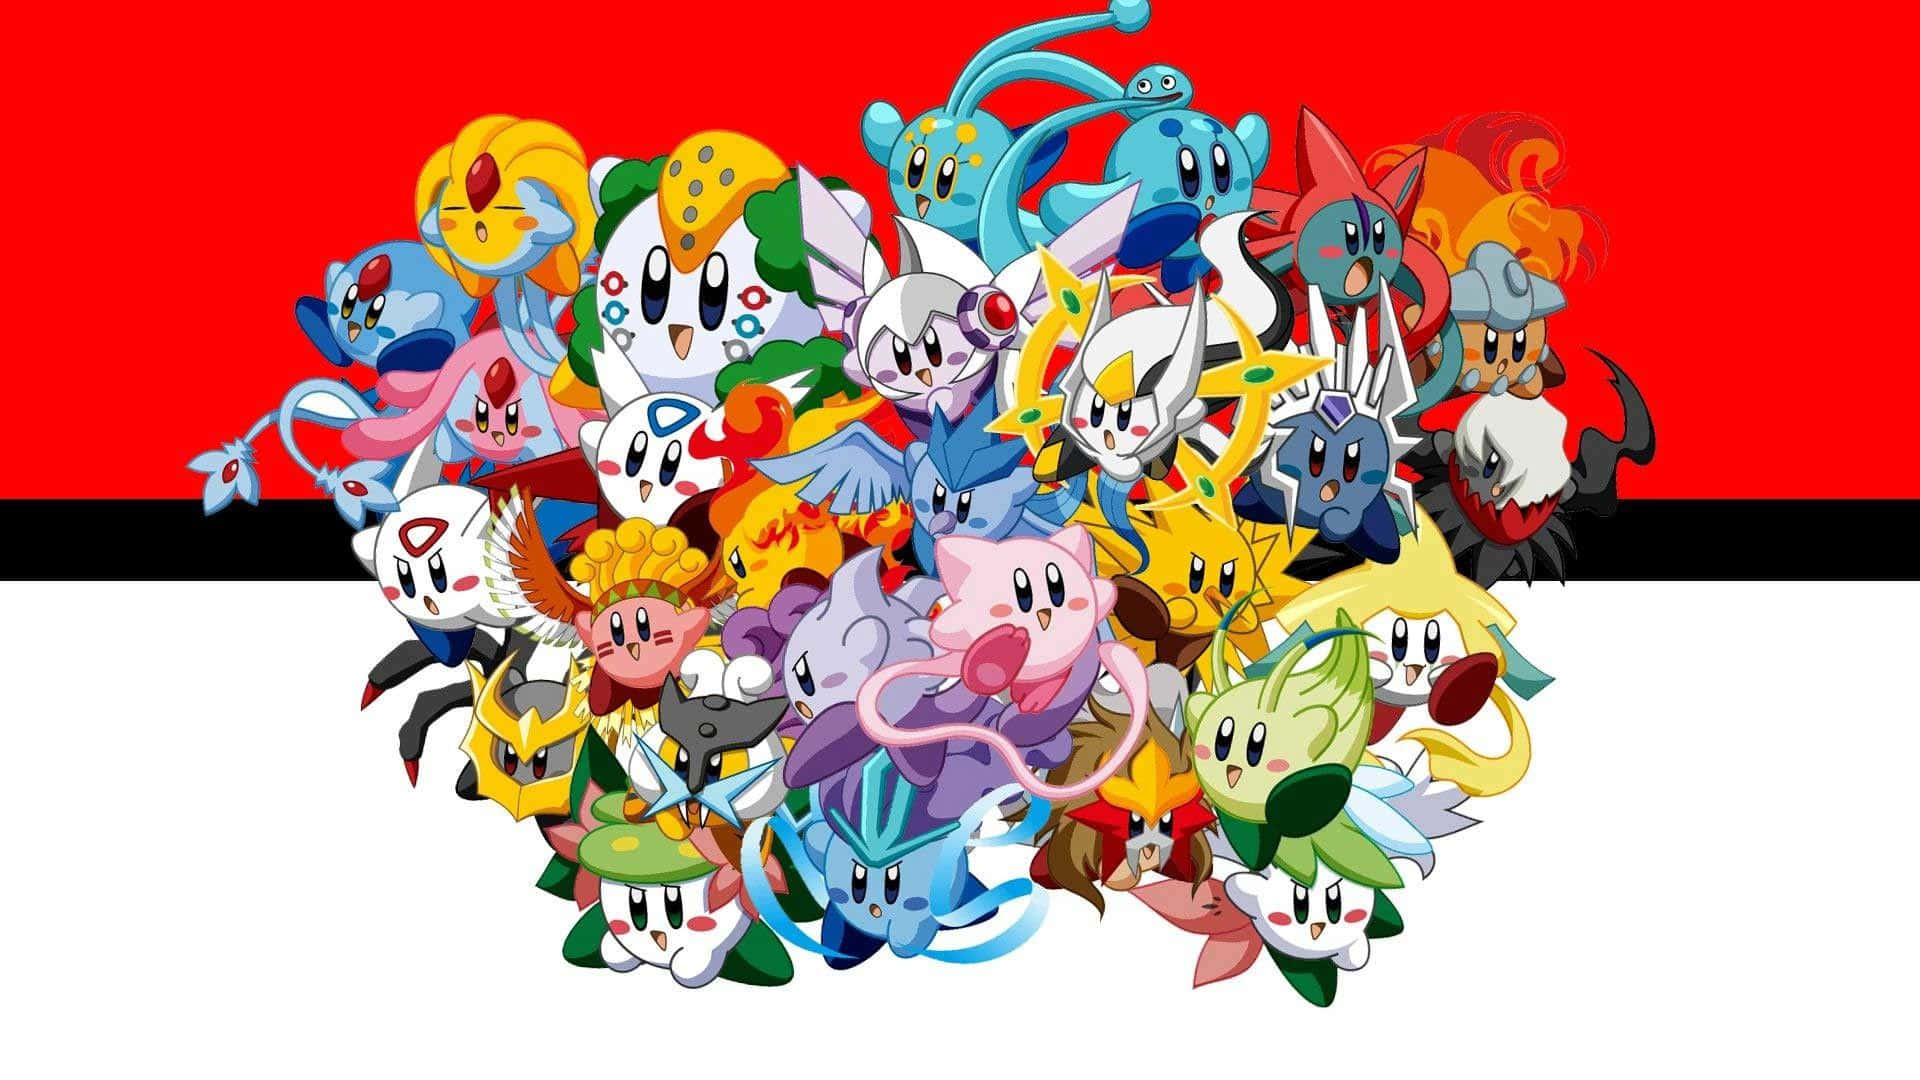 Celebrate your favorite Pokémon with this fun and colorful poster! Wallpaper